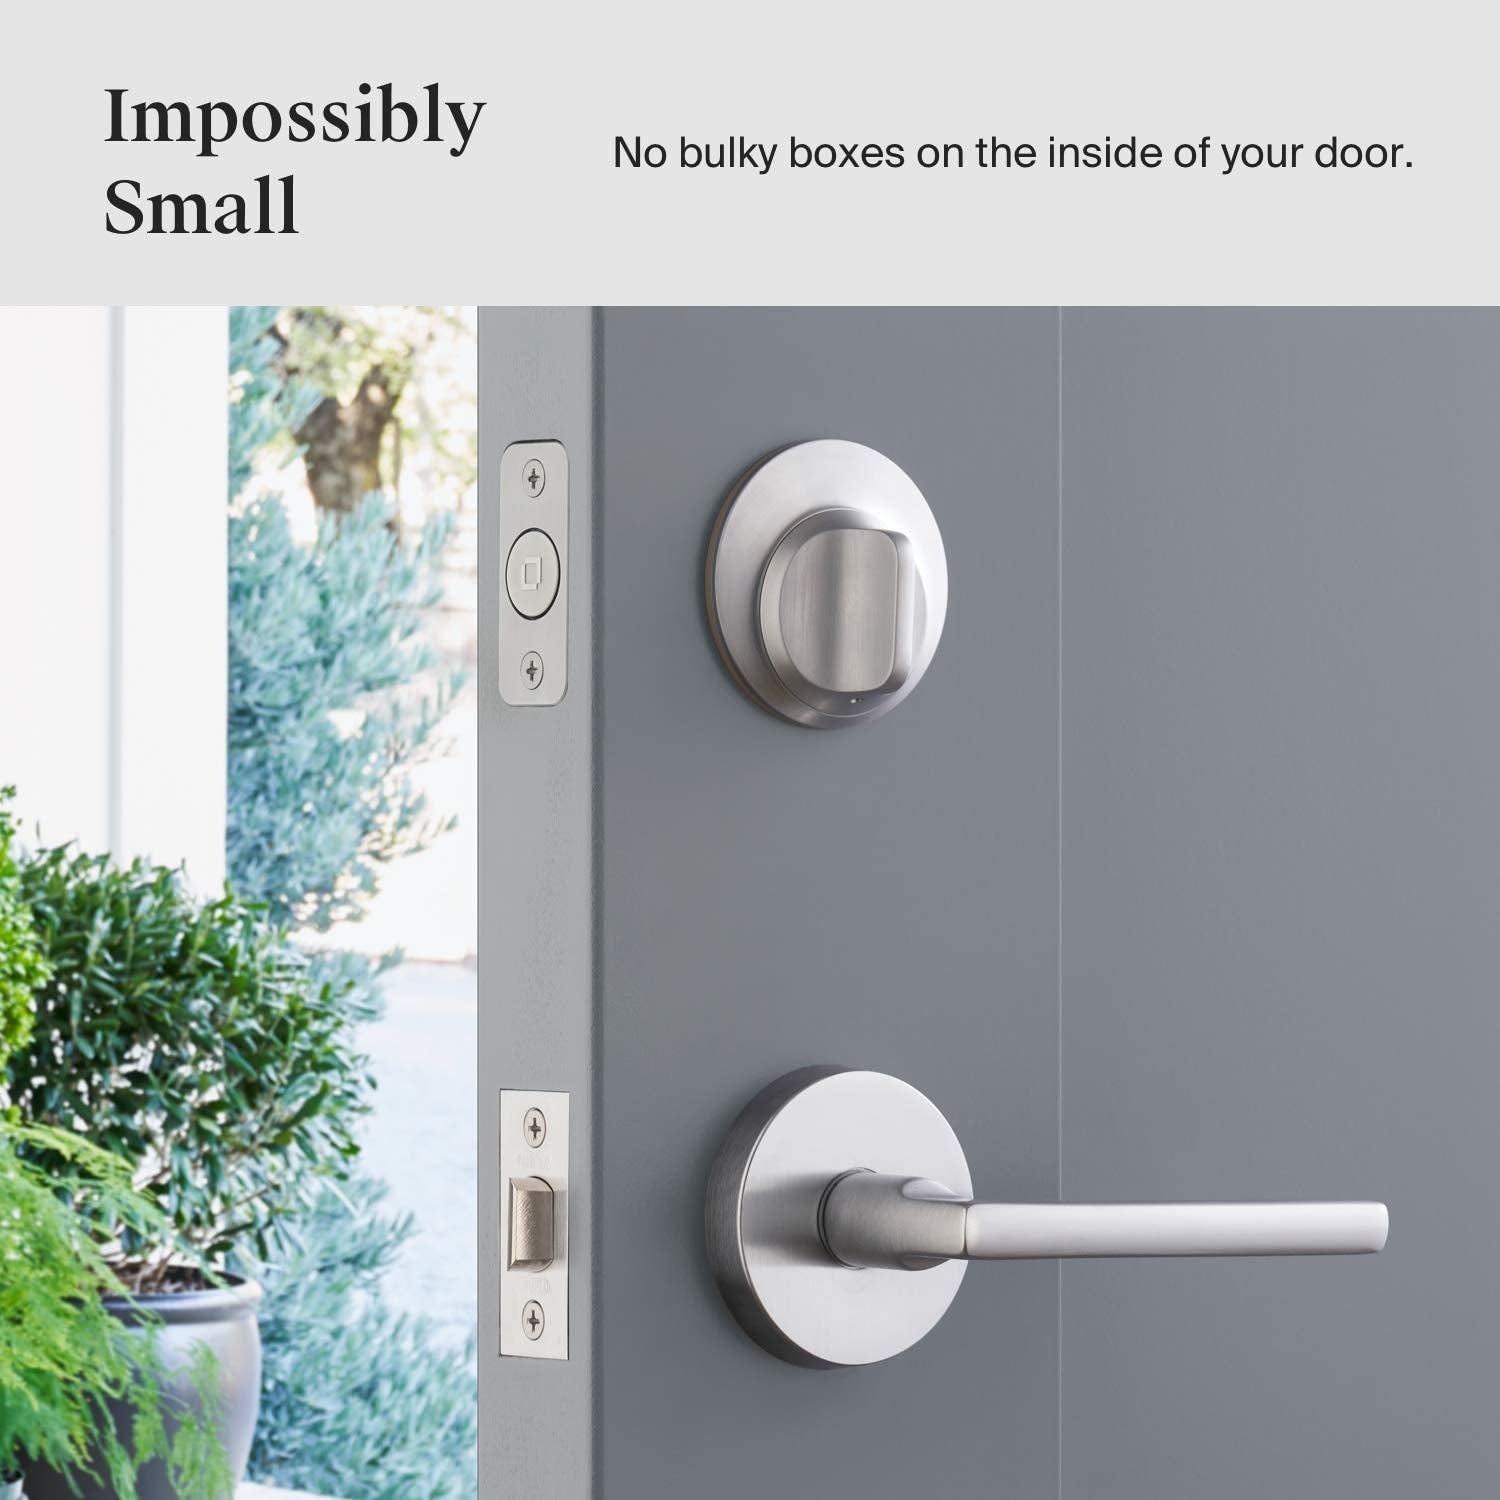 Level, Level Touch, Keyless Entry Using Touch, a Key Card, or Smartphone. Bluetooth Enabled, Homekit Compatible - Satin Chrome